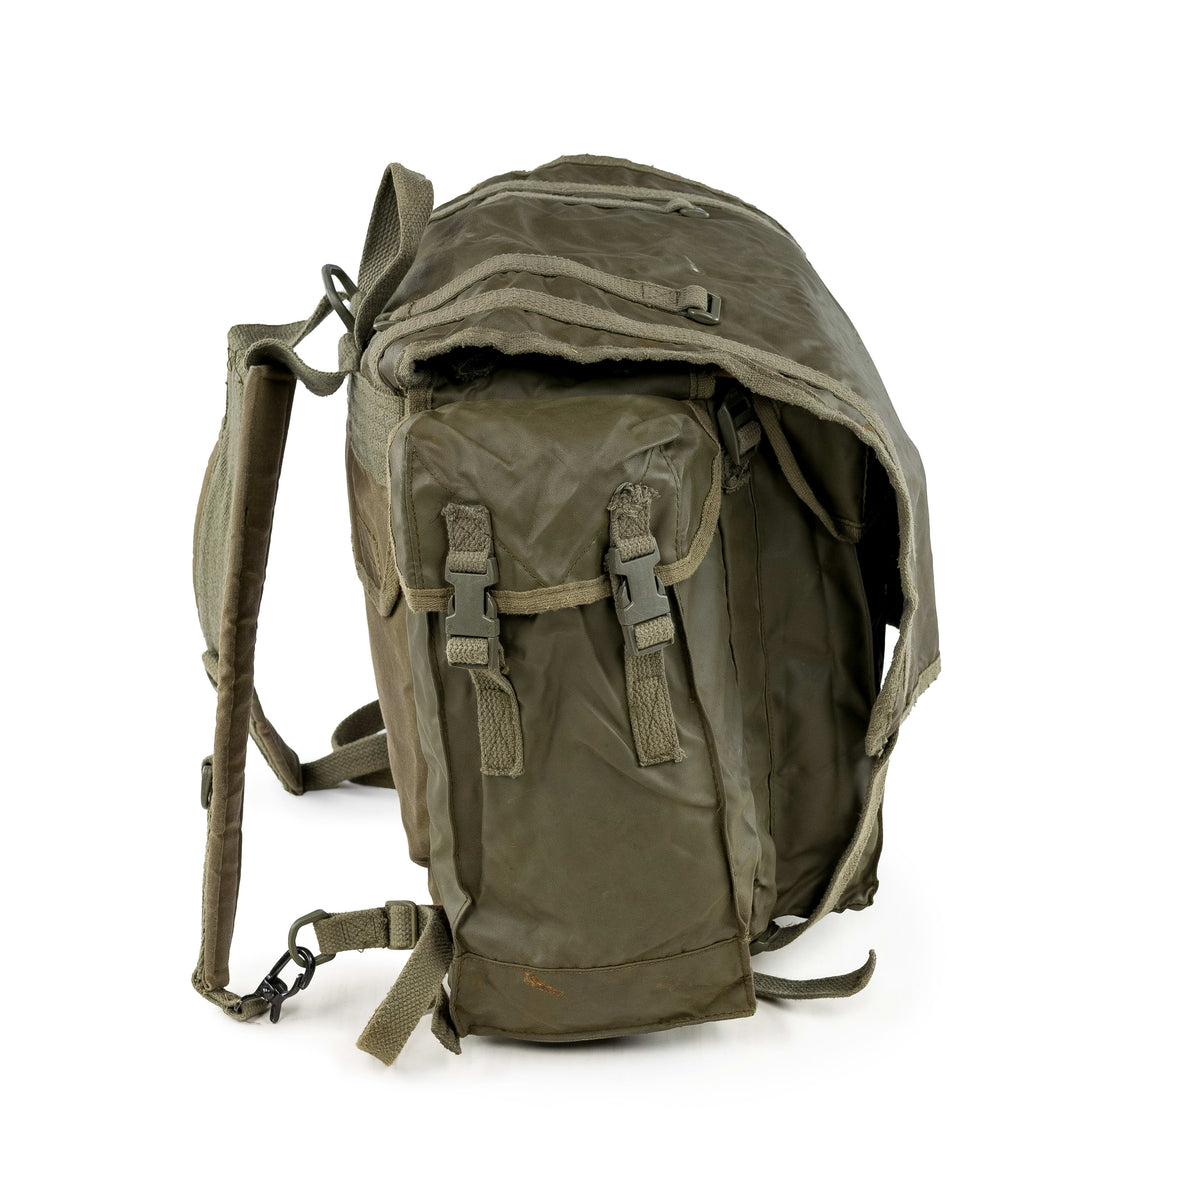 NEW French Army SURPLUS F1 backpack french foreign WATERPROOF DAYPACK 20 lit 